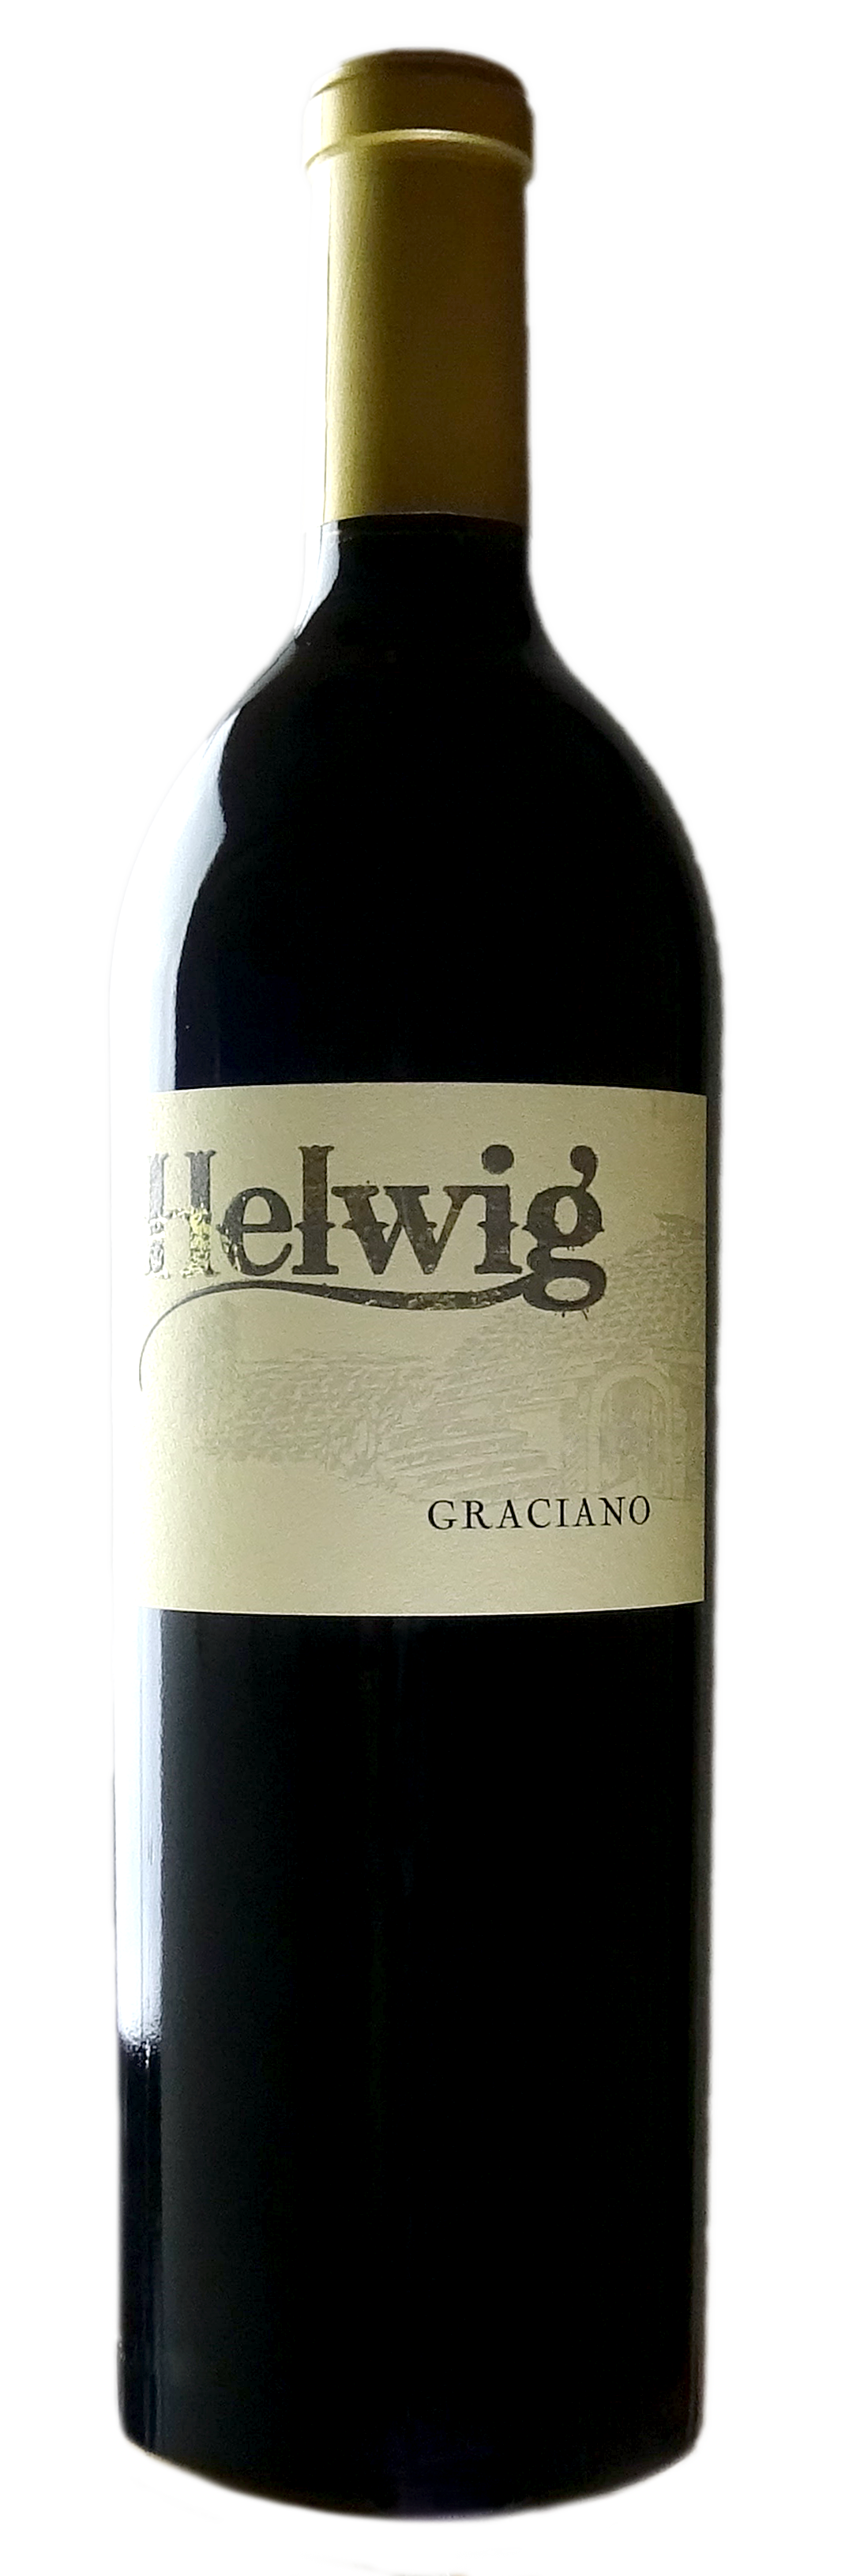 Product Image for Graciano '16